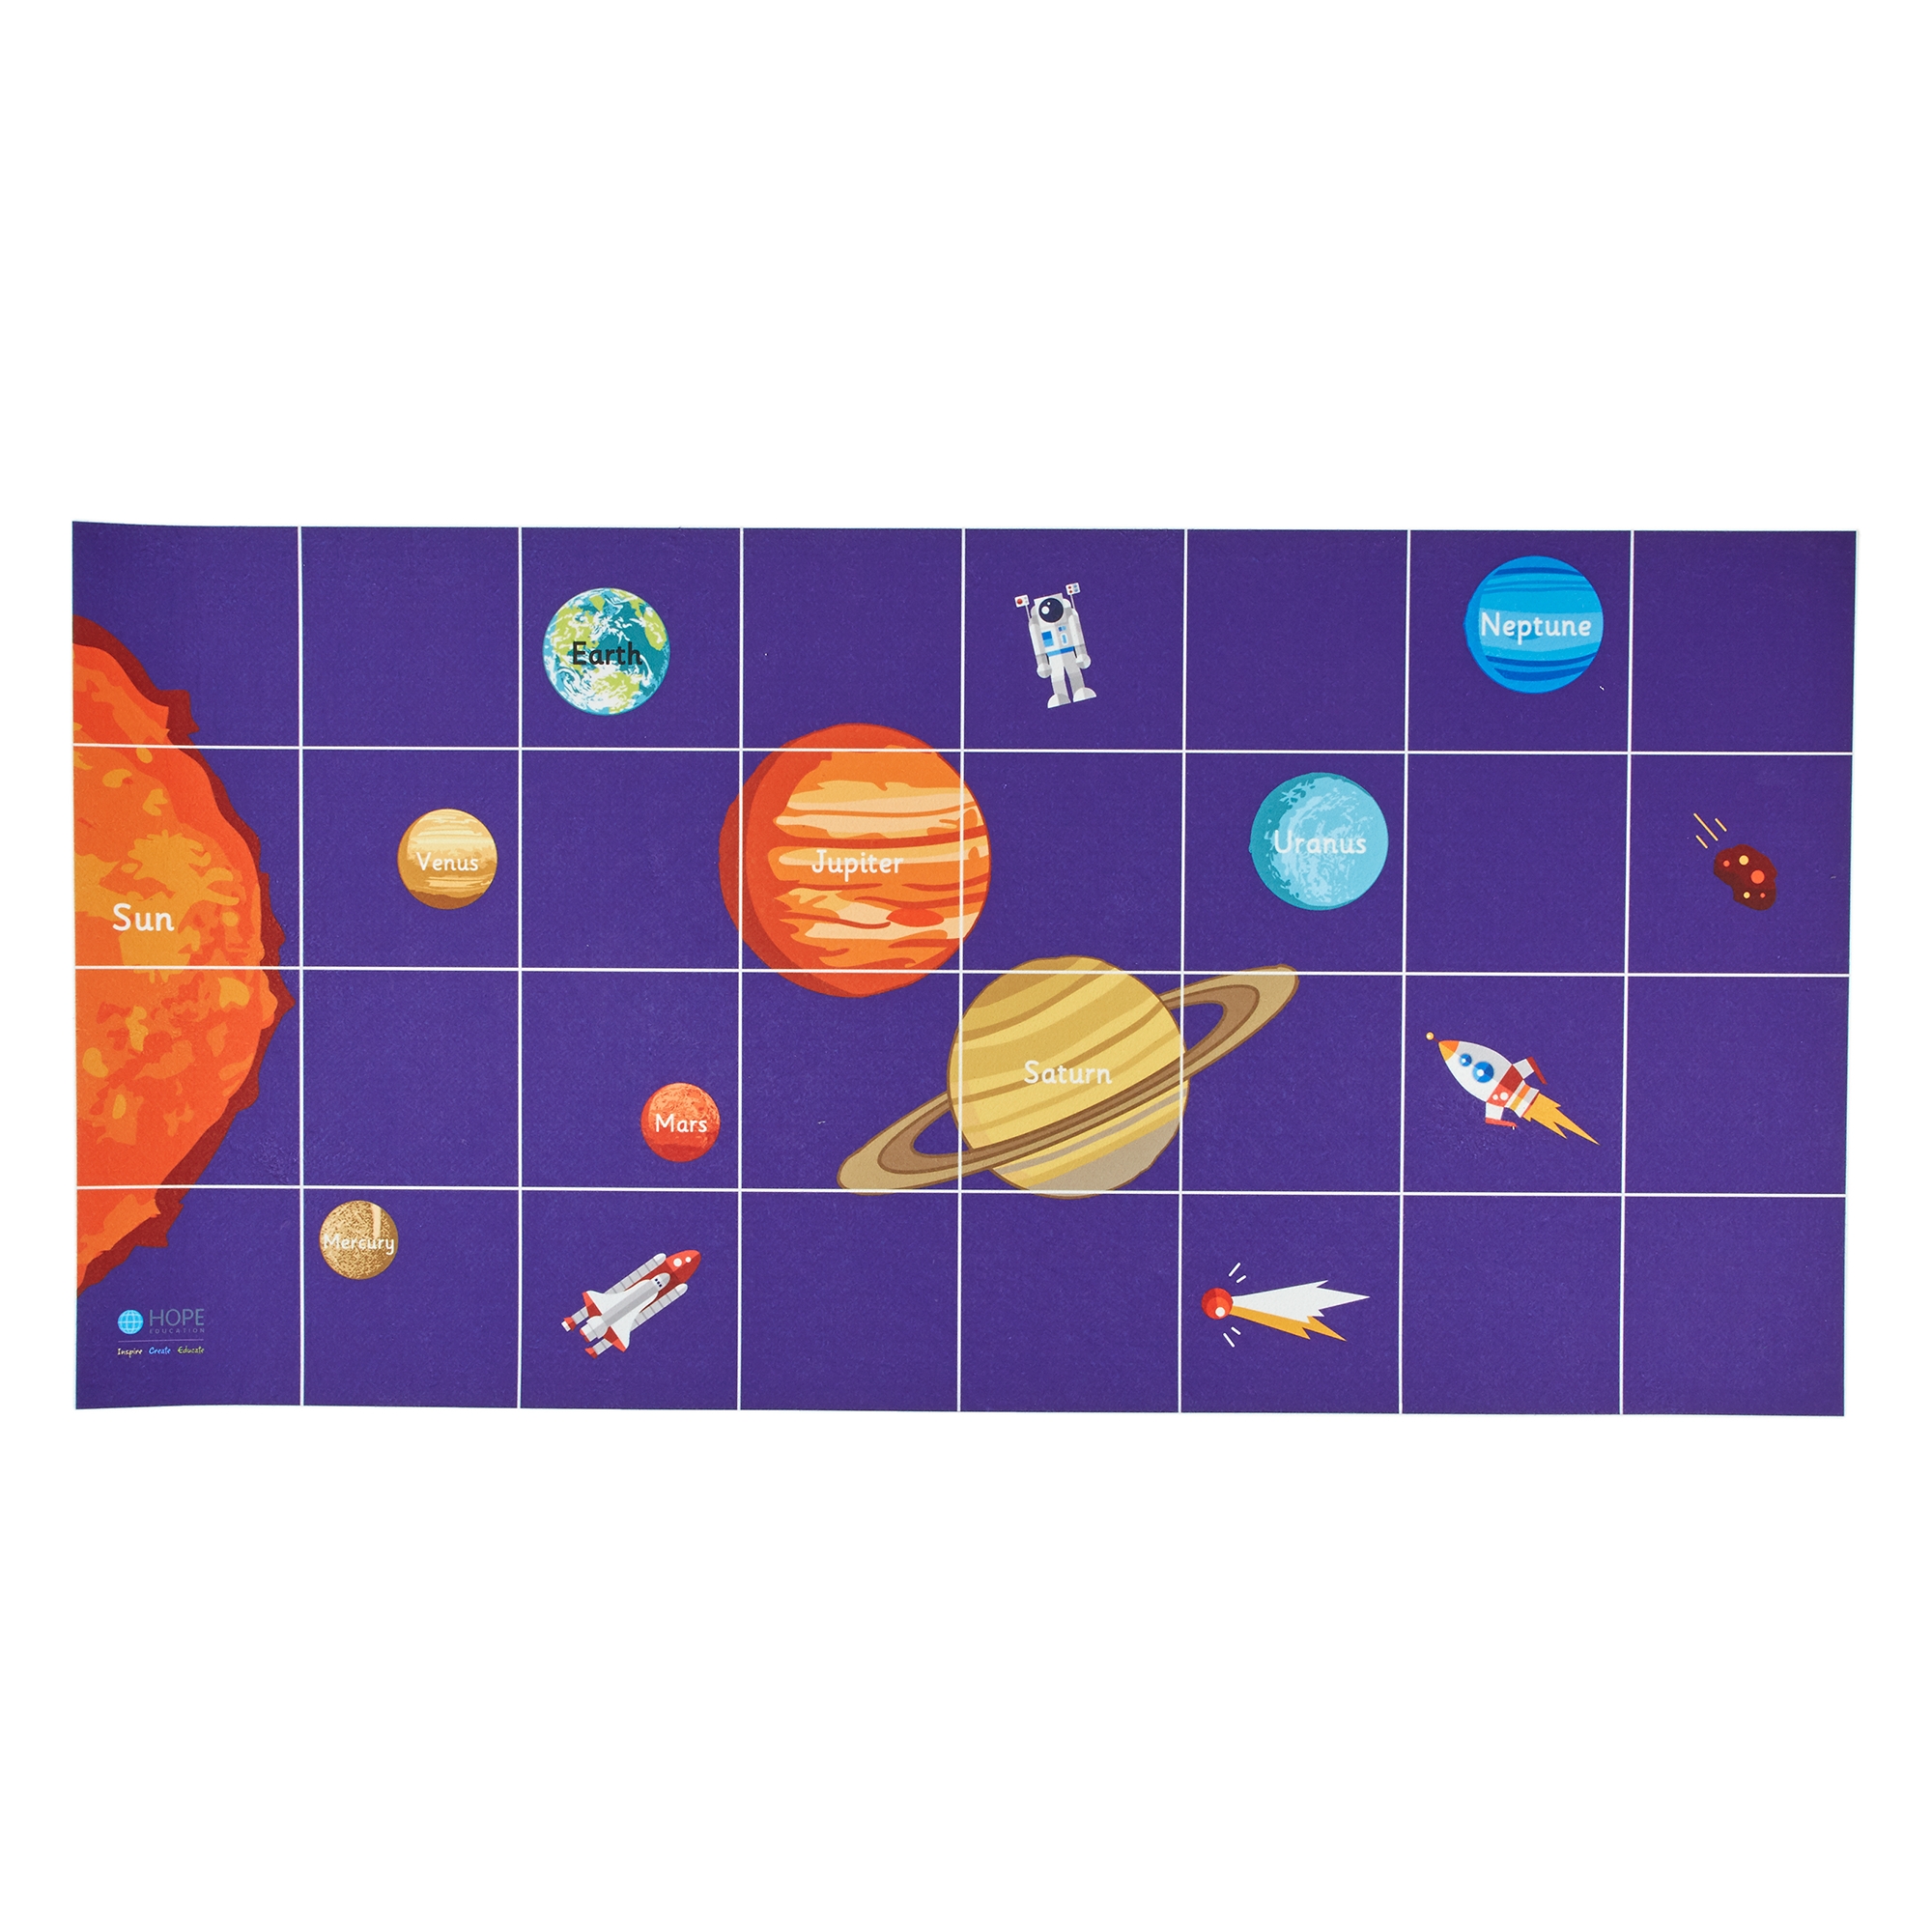 EaRL Solar System Mat from Hope Education